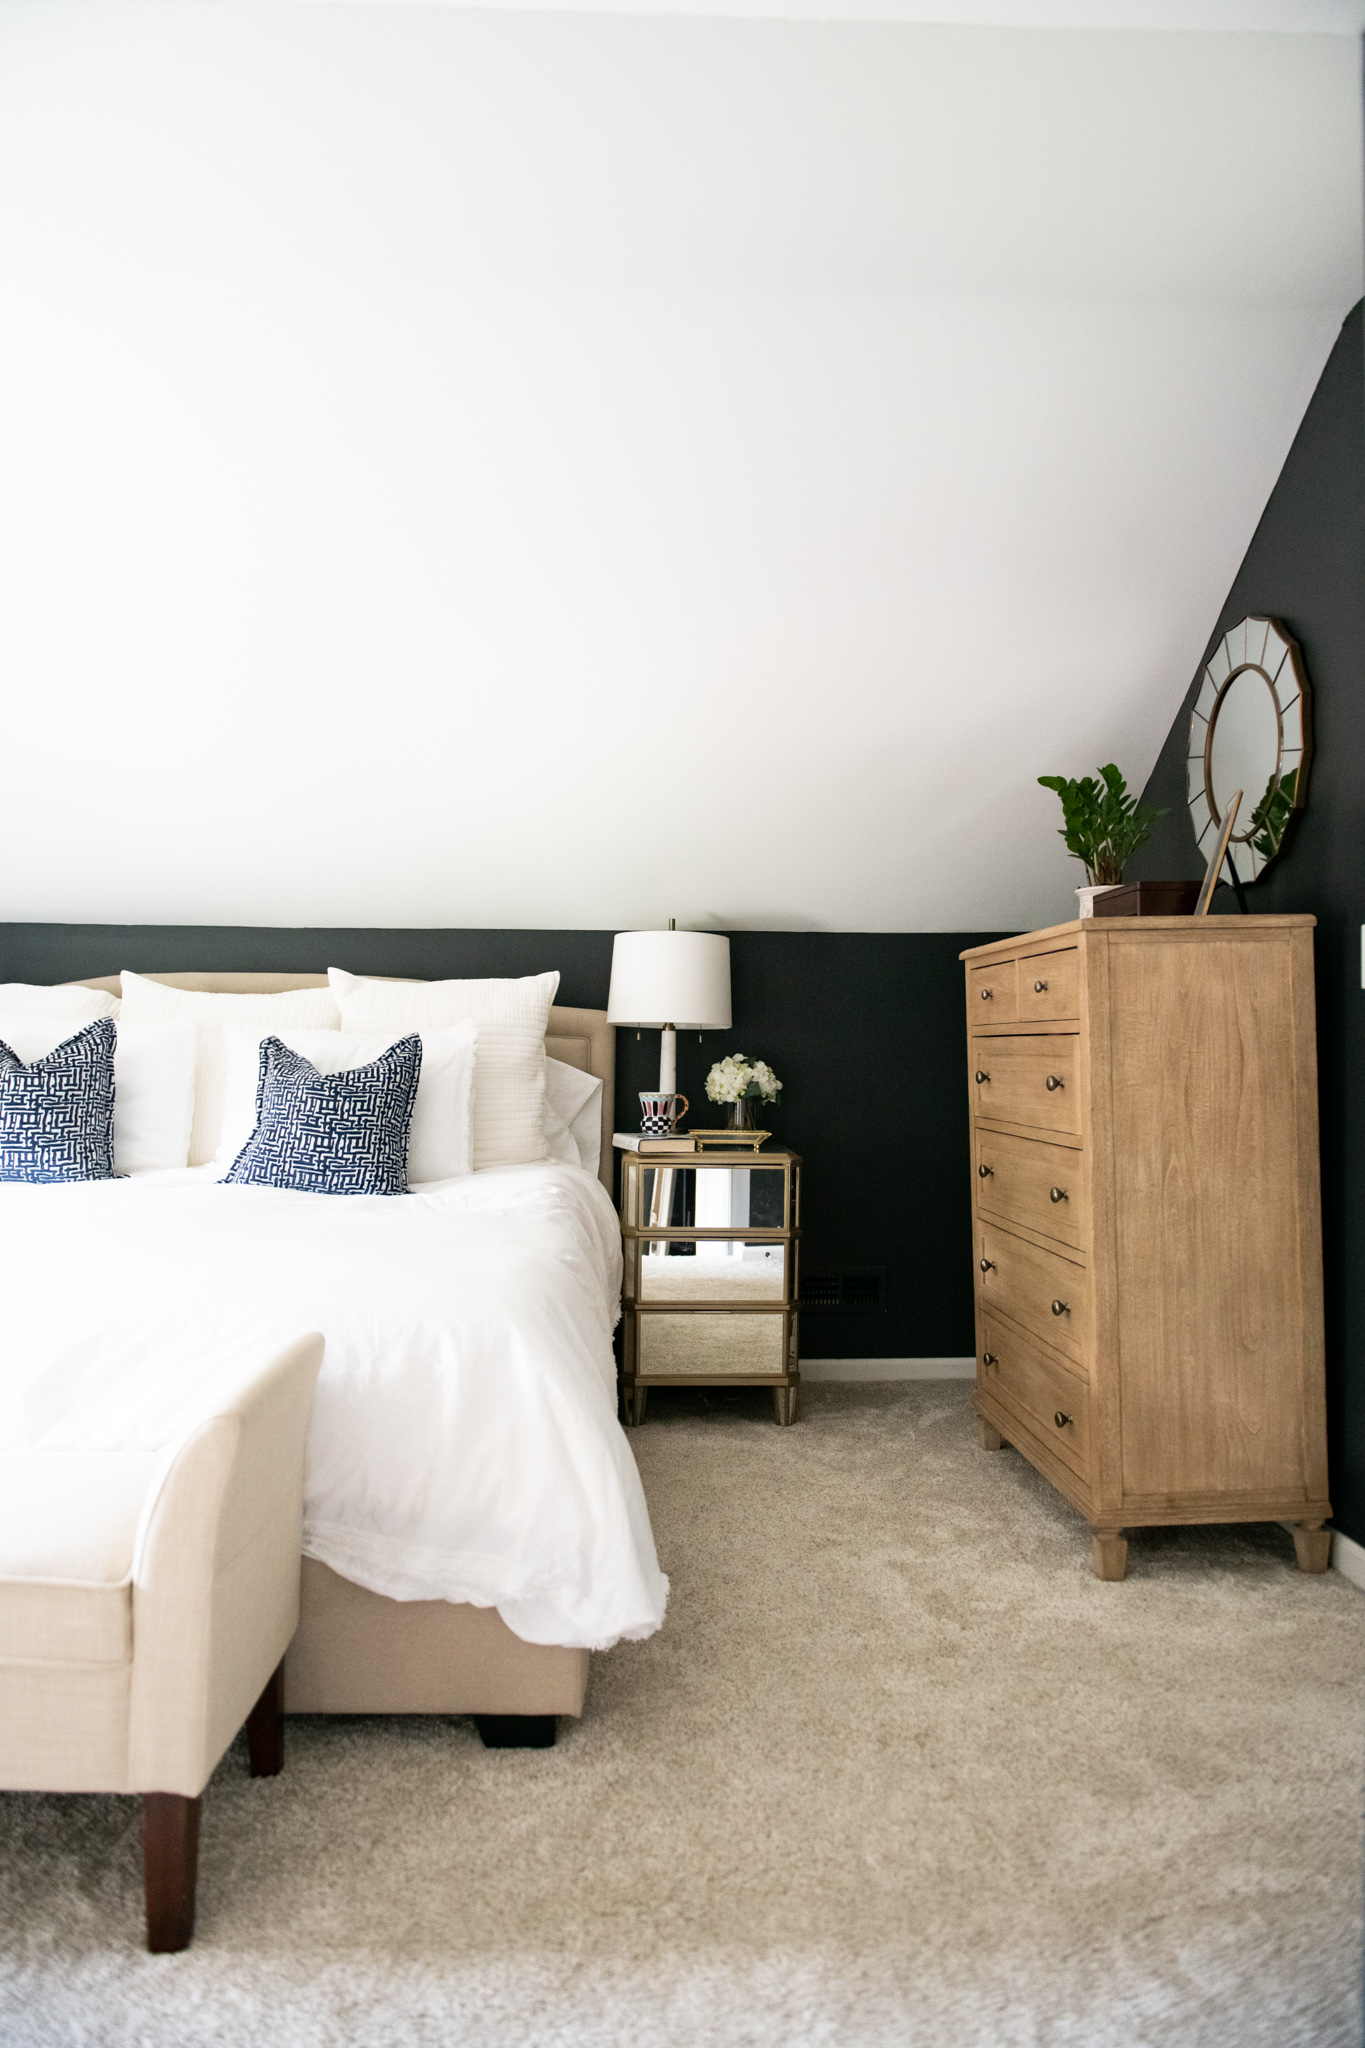 Master Bedroom Remodel Ideas by popular Ohio life and style blog, Coffee Beans and Bobby Pins: image of a master bedroom with a wood bead chandelier, black walls, mirrored night stands, light wood dresser, round mirror, king size bed with white linens and a cream fabric bench at the foot of the bed.